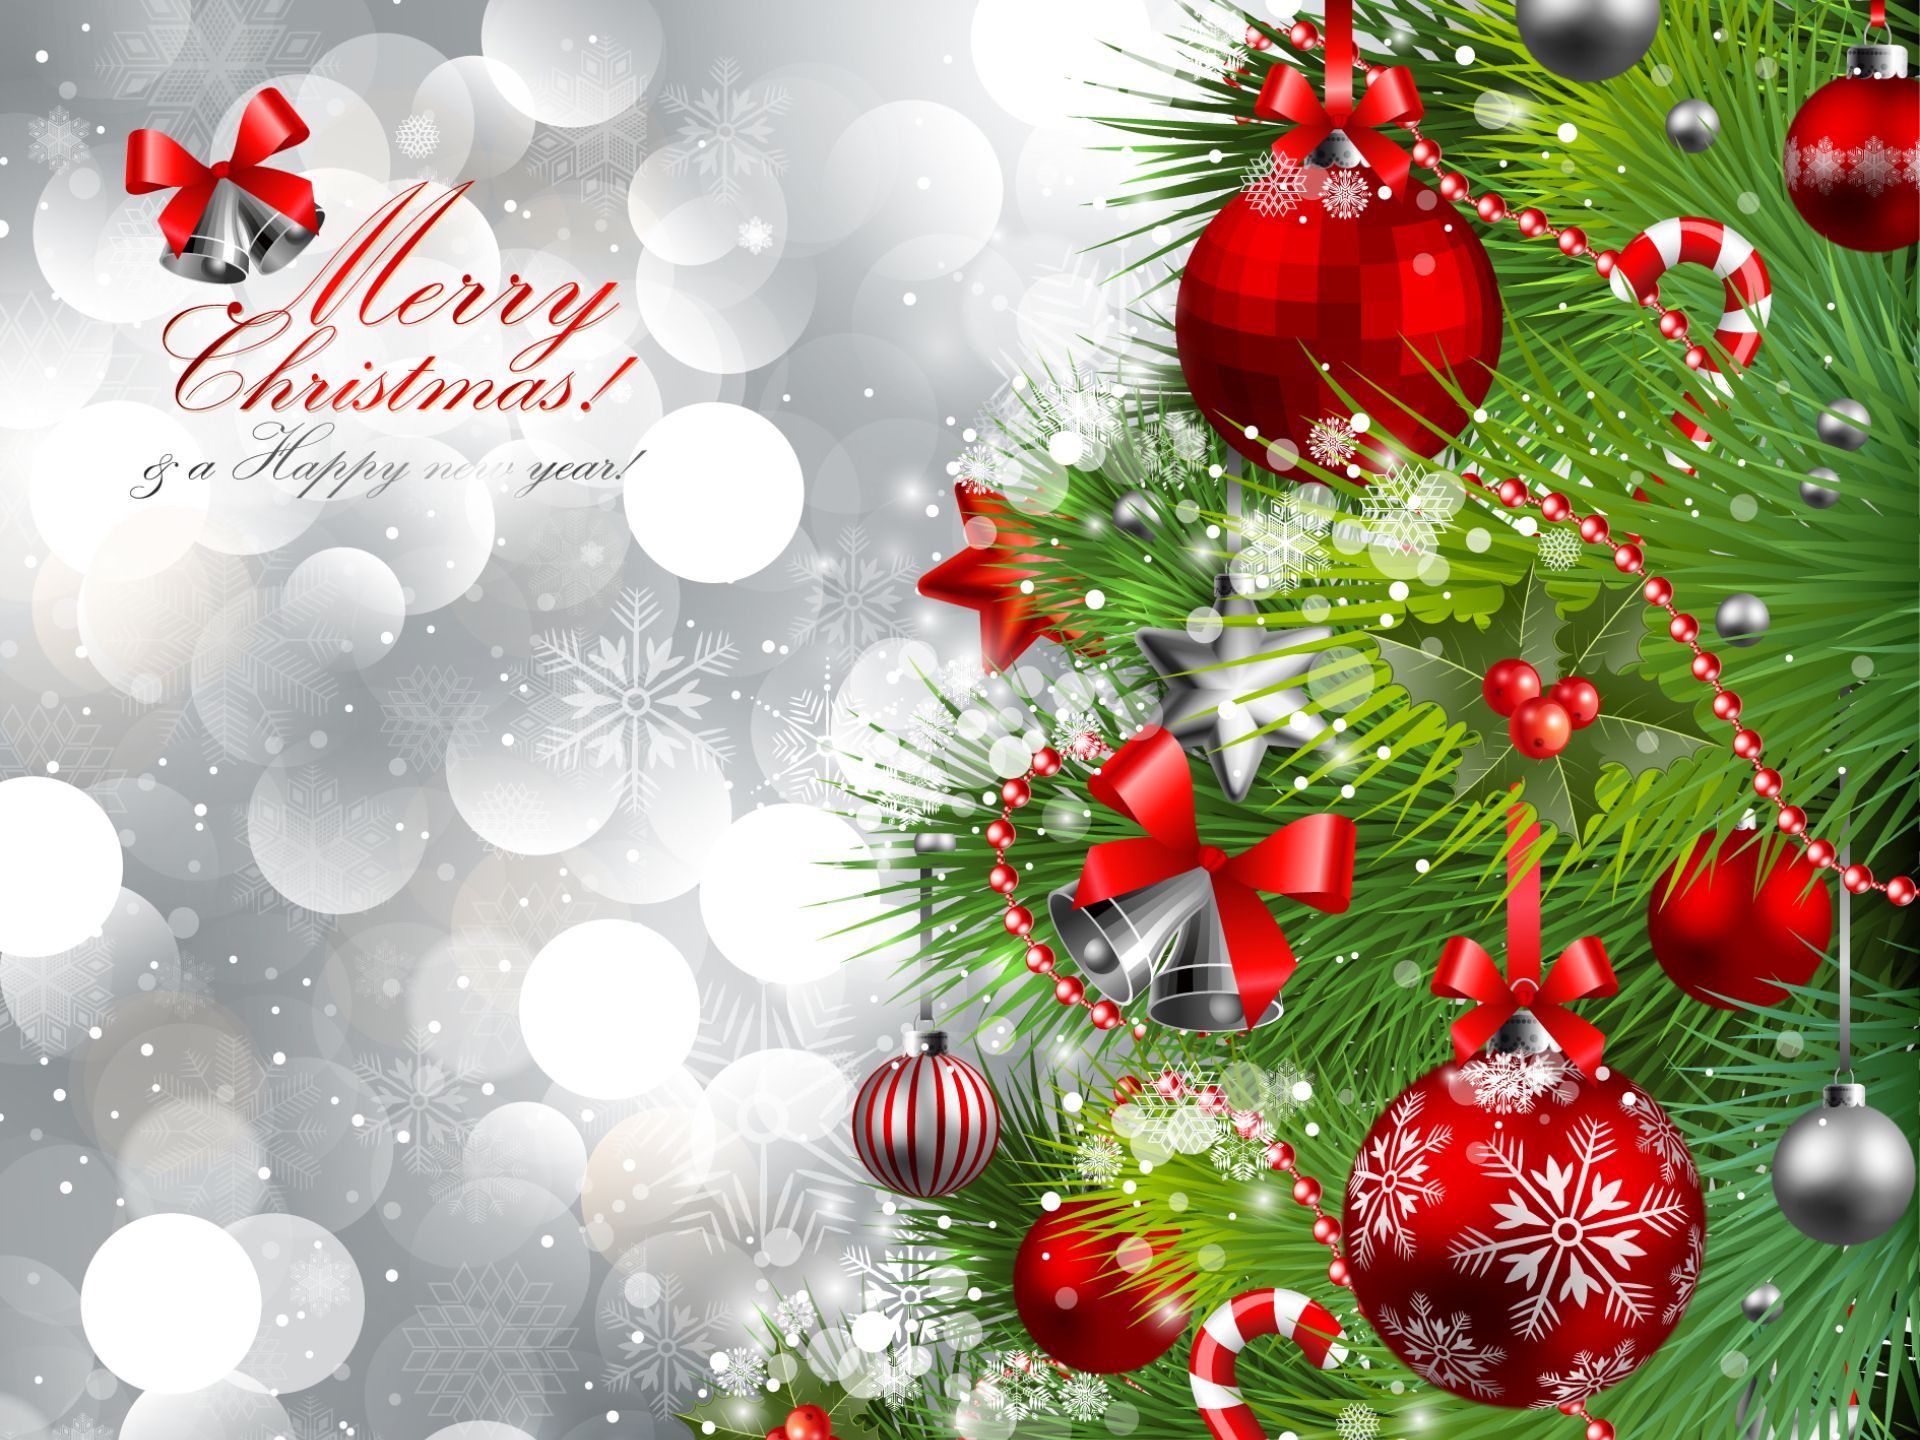 Merry Christmas Jpg Images Free